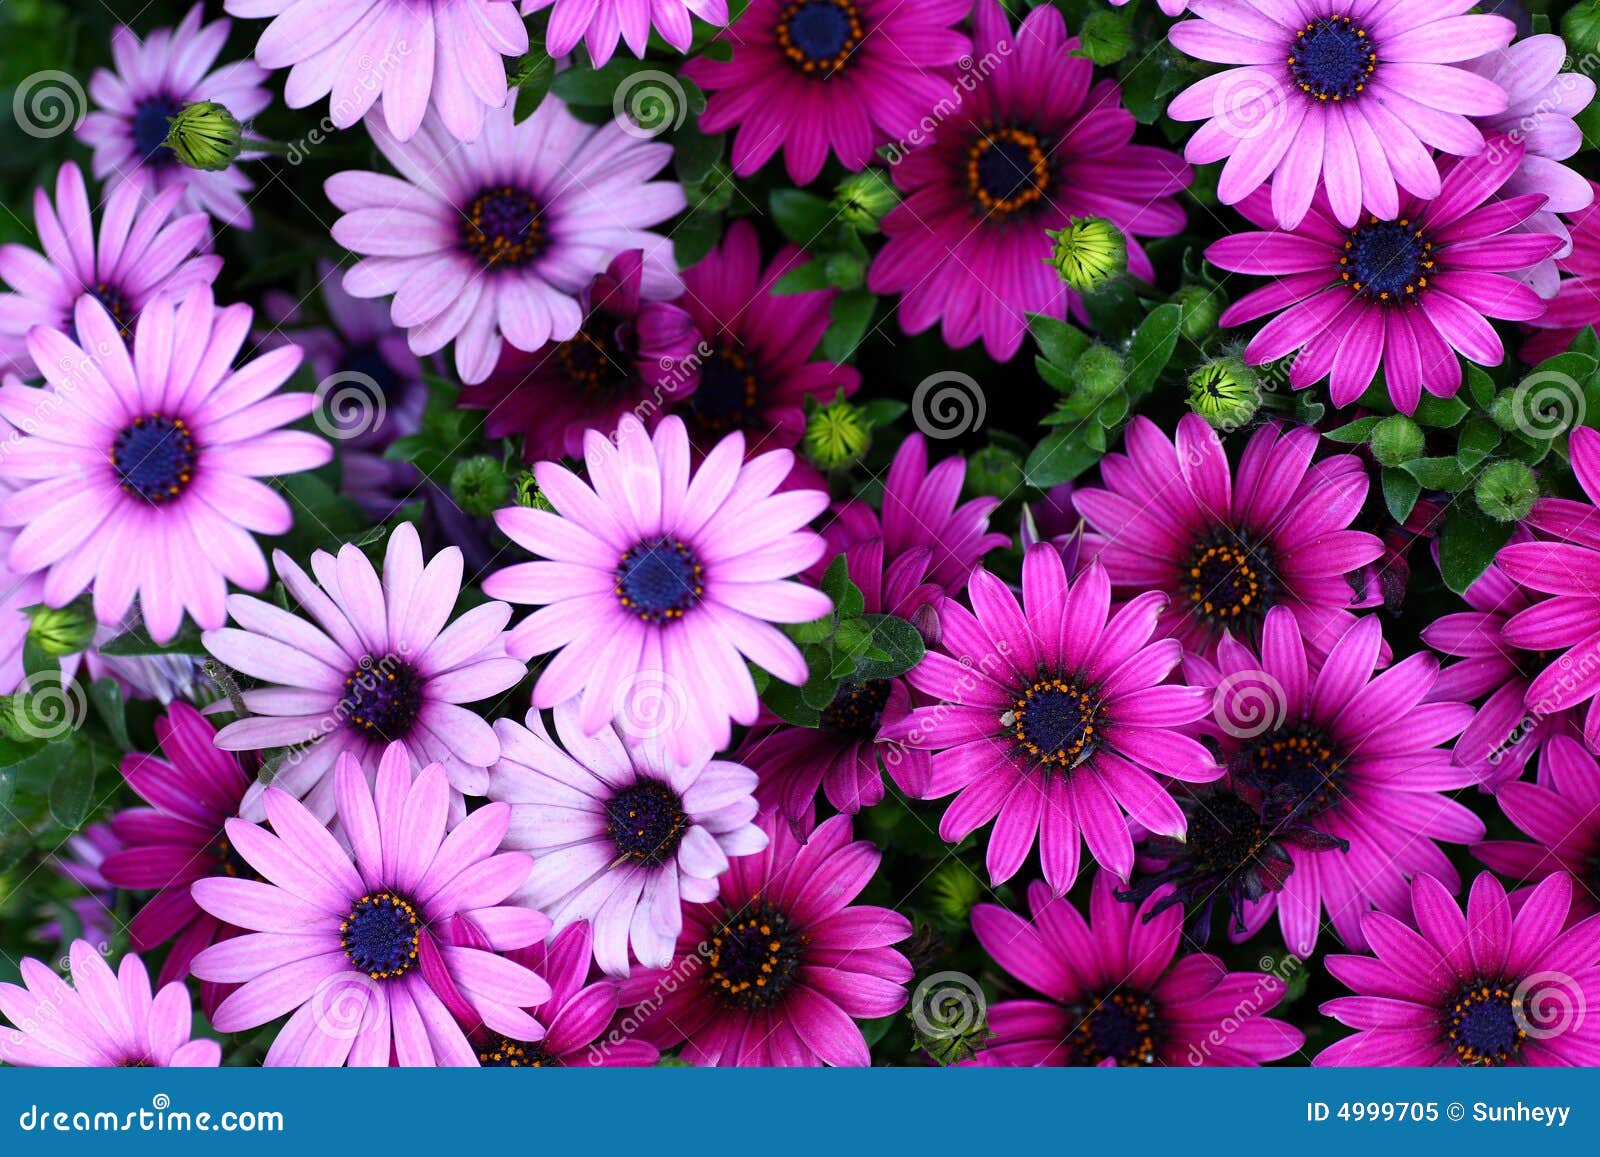 Flowers images free download driver booster download windows 10